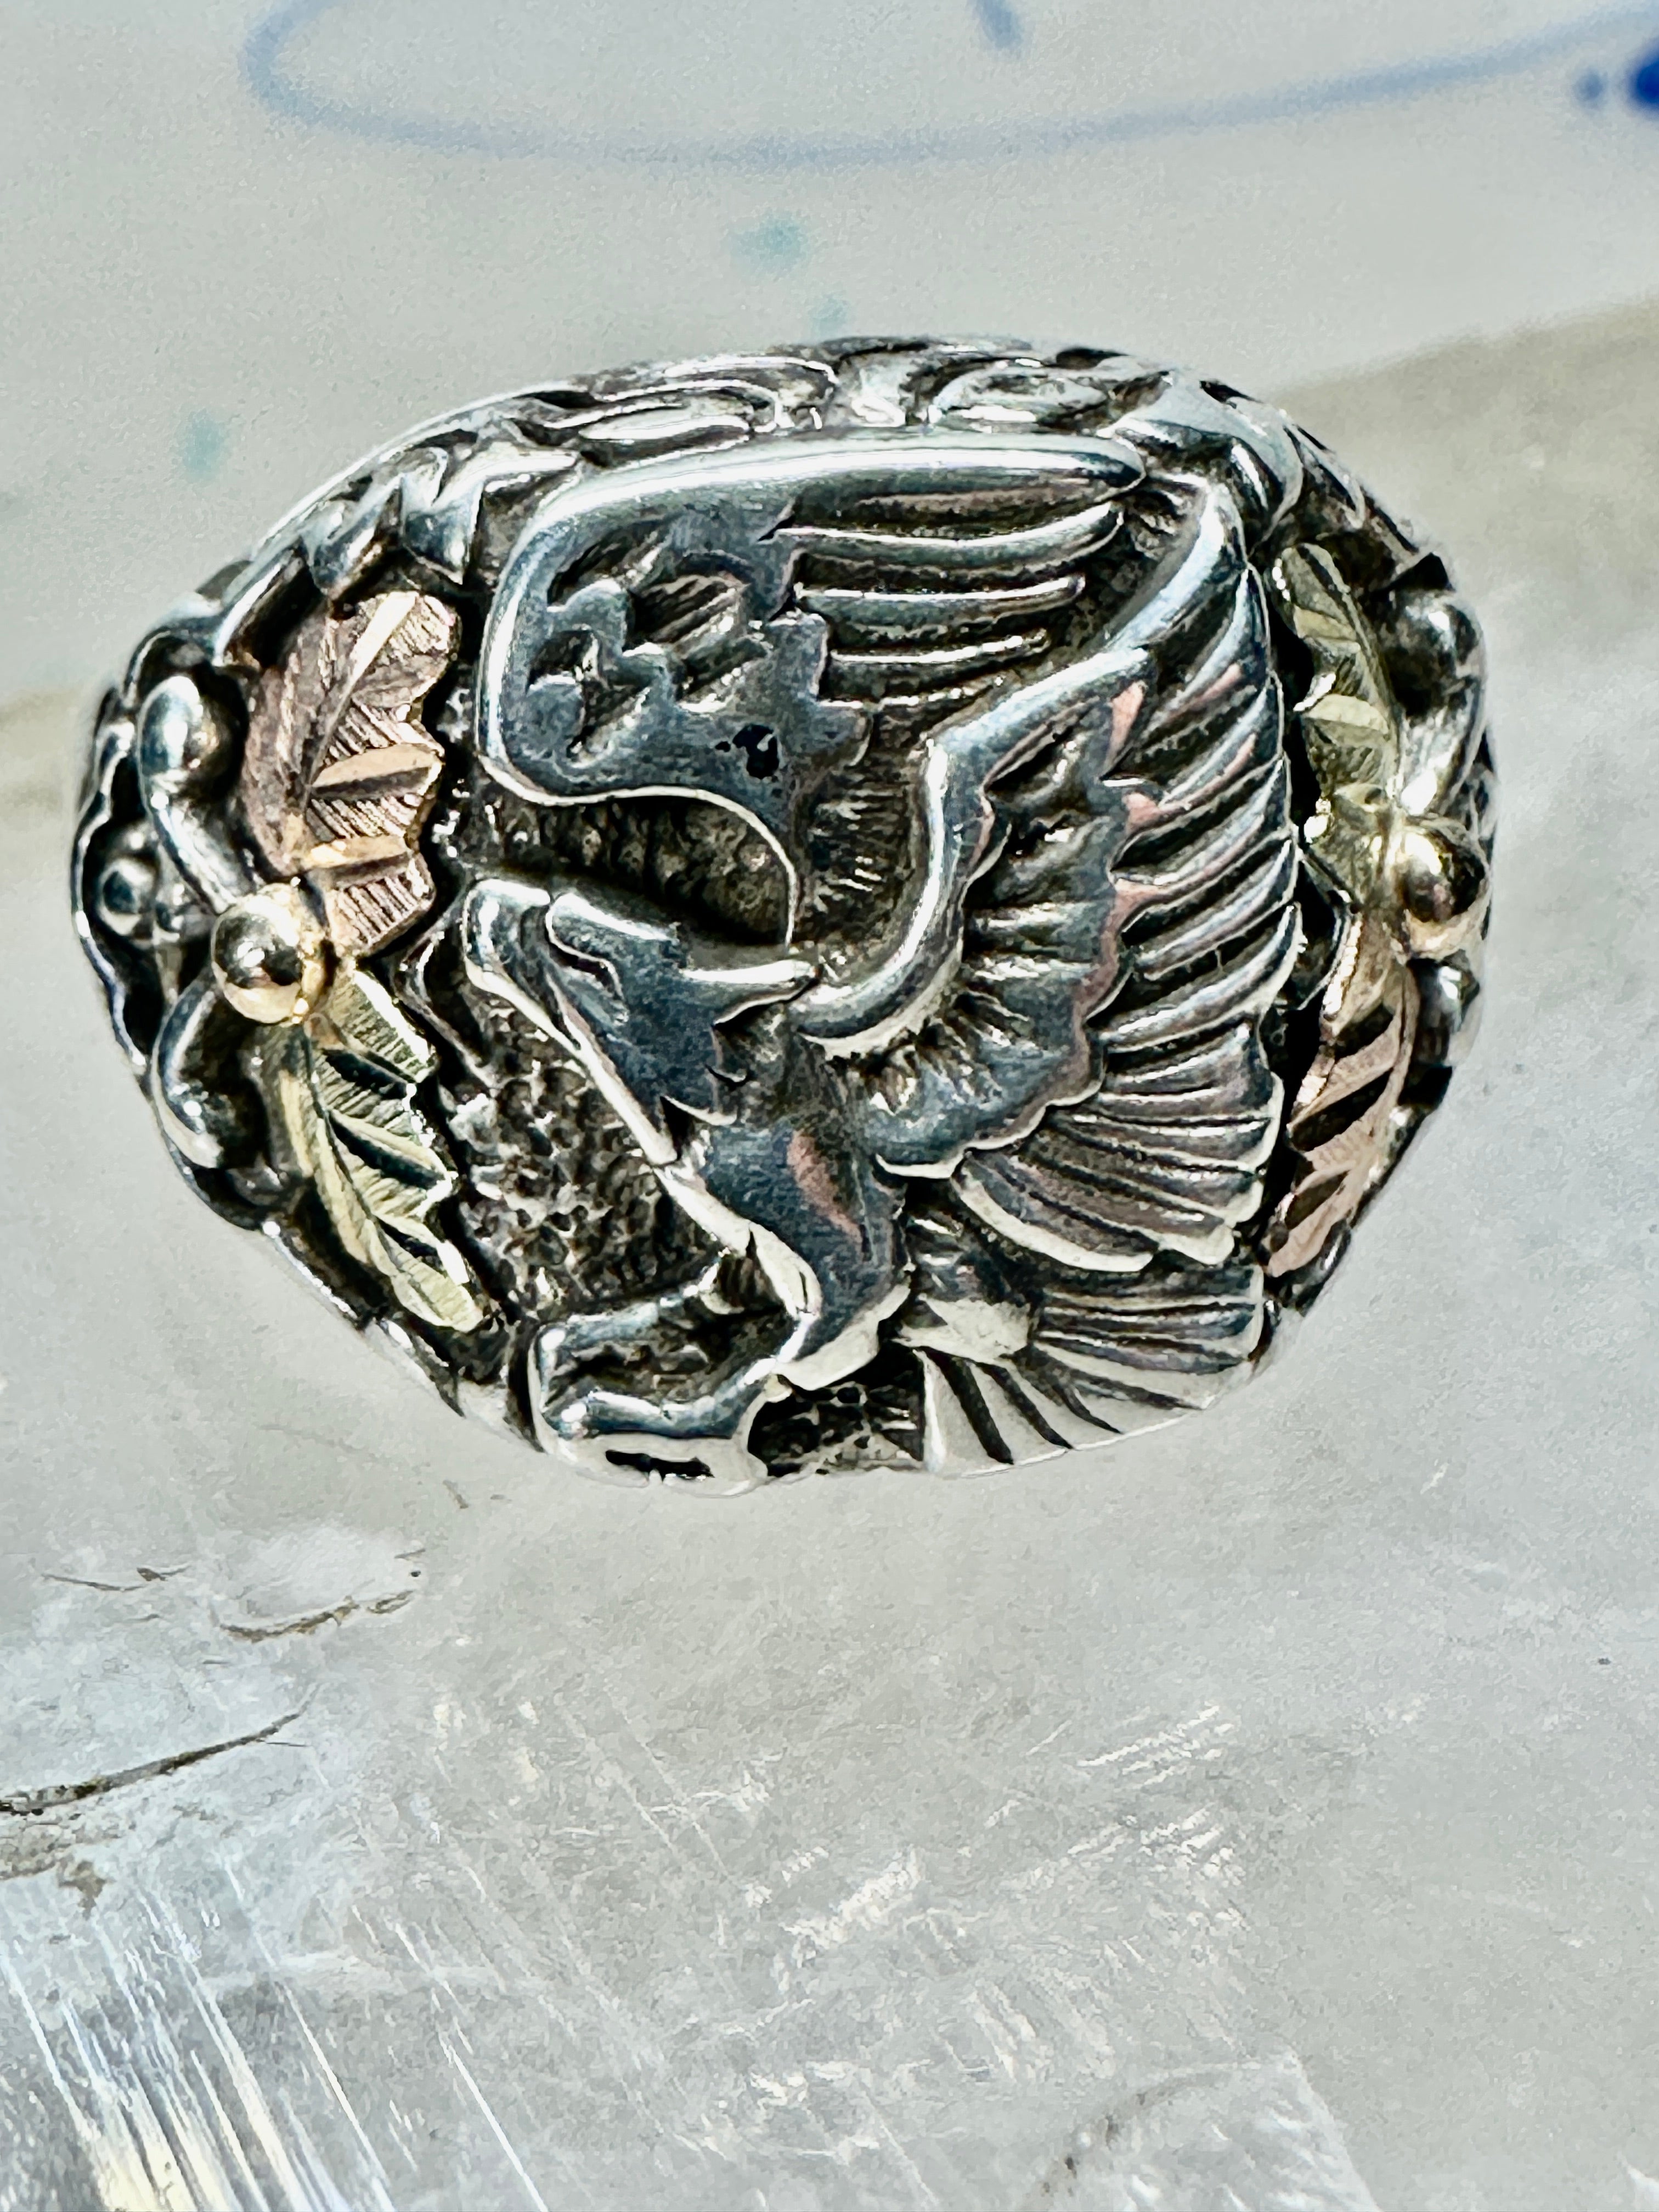 Amazon.com: Mens Silver Eagle Ring, Realistic Hawk Band, American Eagle Ring,  Handmade Bird Jewelry, Gift for him (16) : Handmade Products